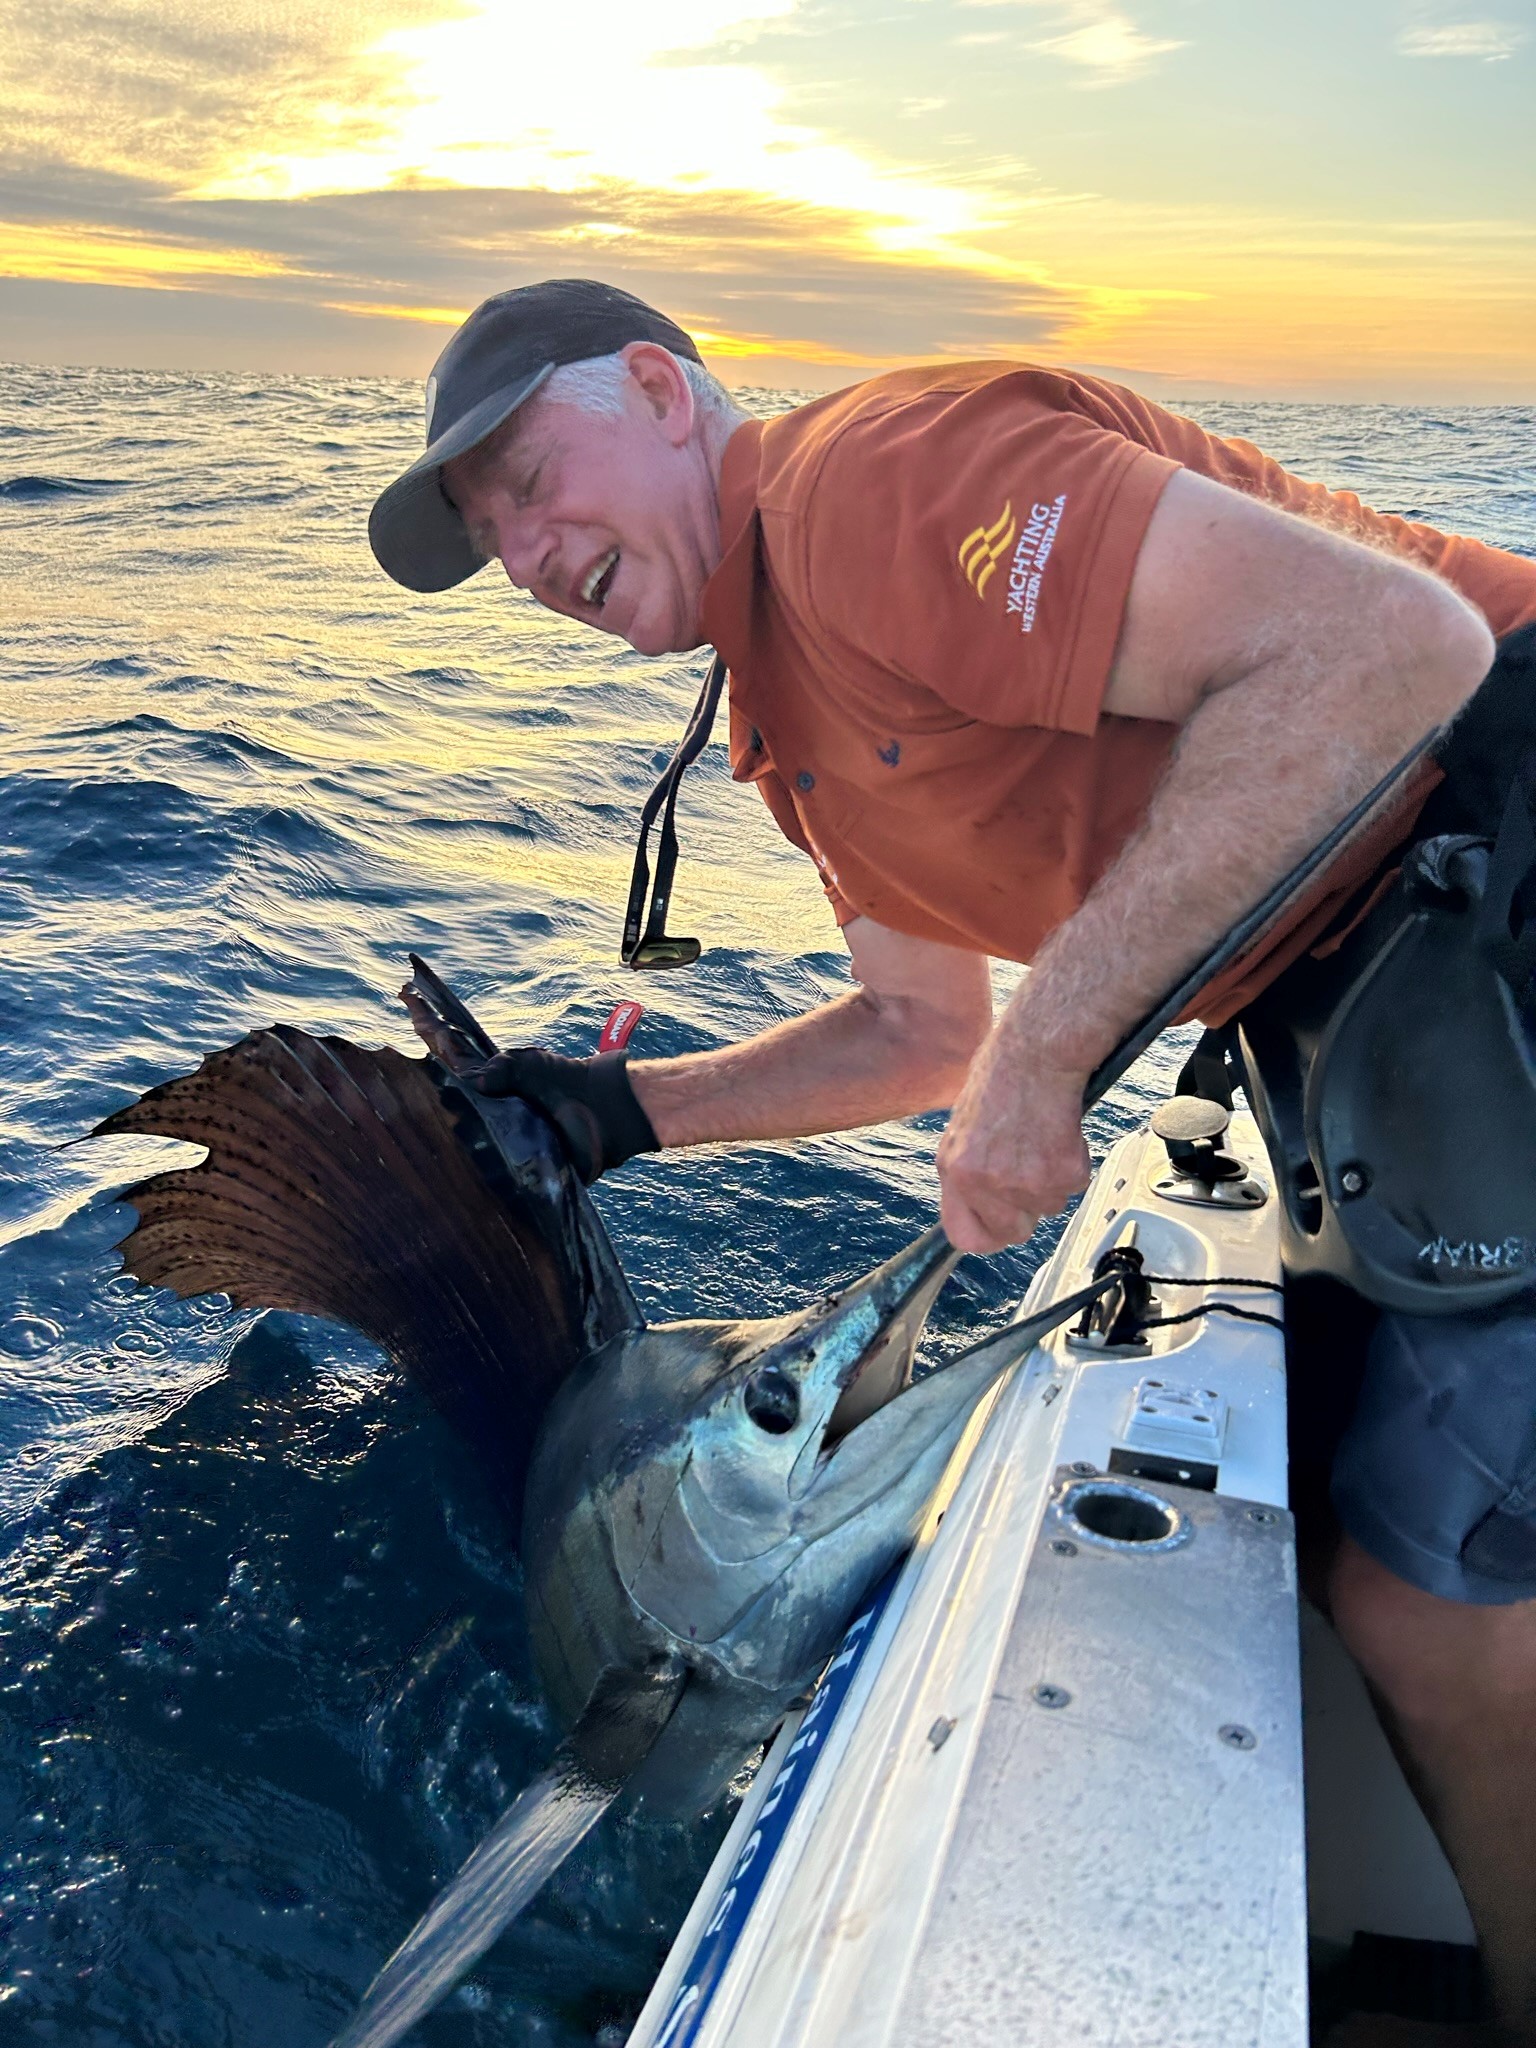 Brian Edwards bringing large marlin to the boat after catching this trophy